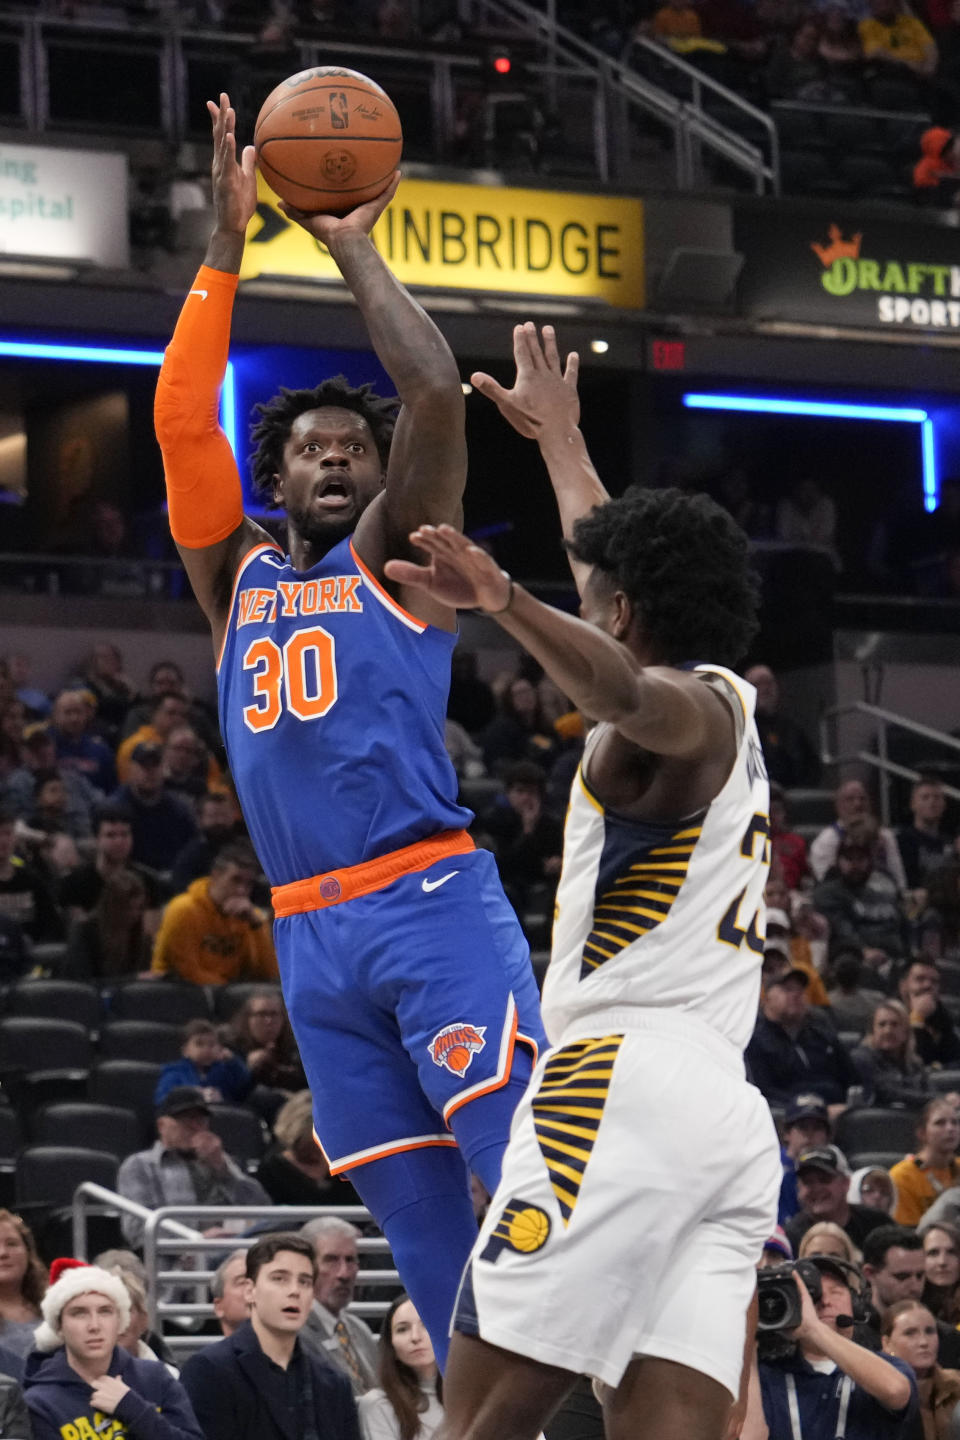 New York Knicks forward Julius Randle (30) shoots over Indiana Pacers forward Aaron Nesmith during the first half of an NBA basketball game in Indianapolis, Sunday, Dec. 18, 2022. (AP Photo/AJ Mast)